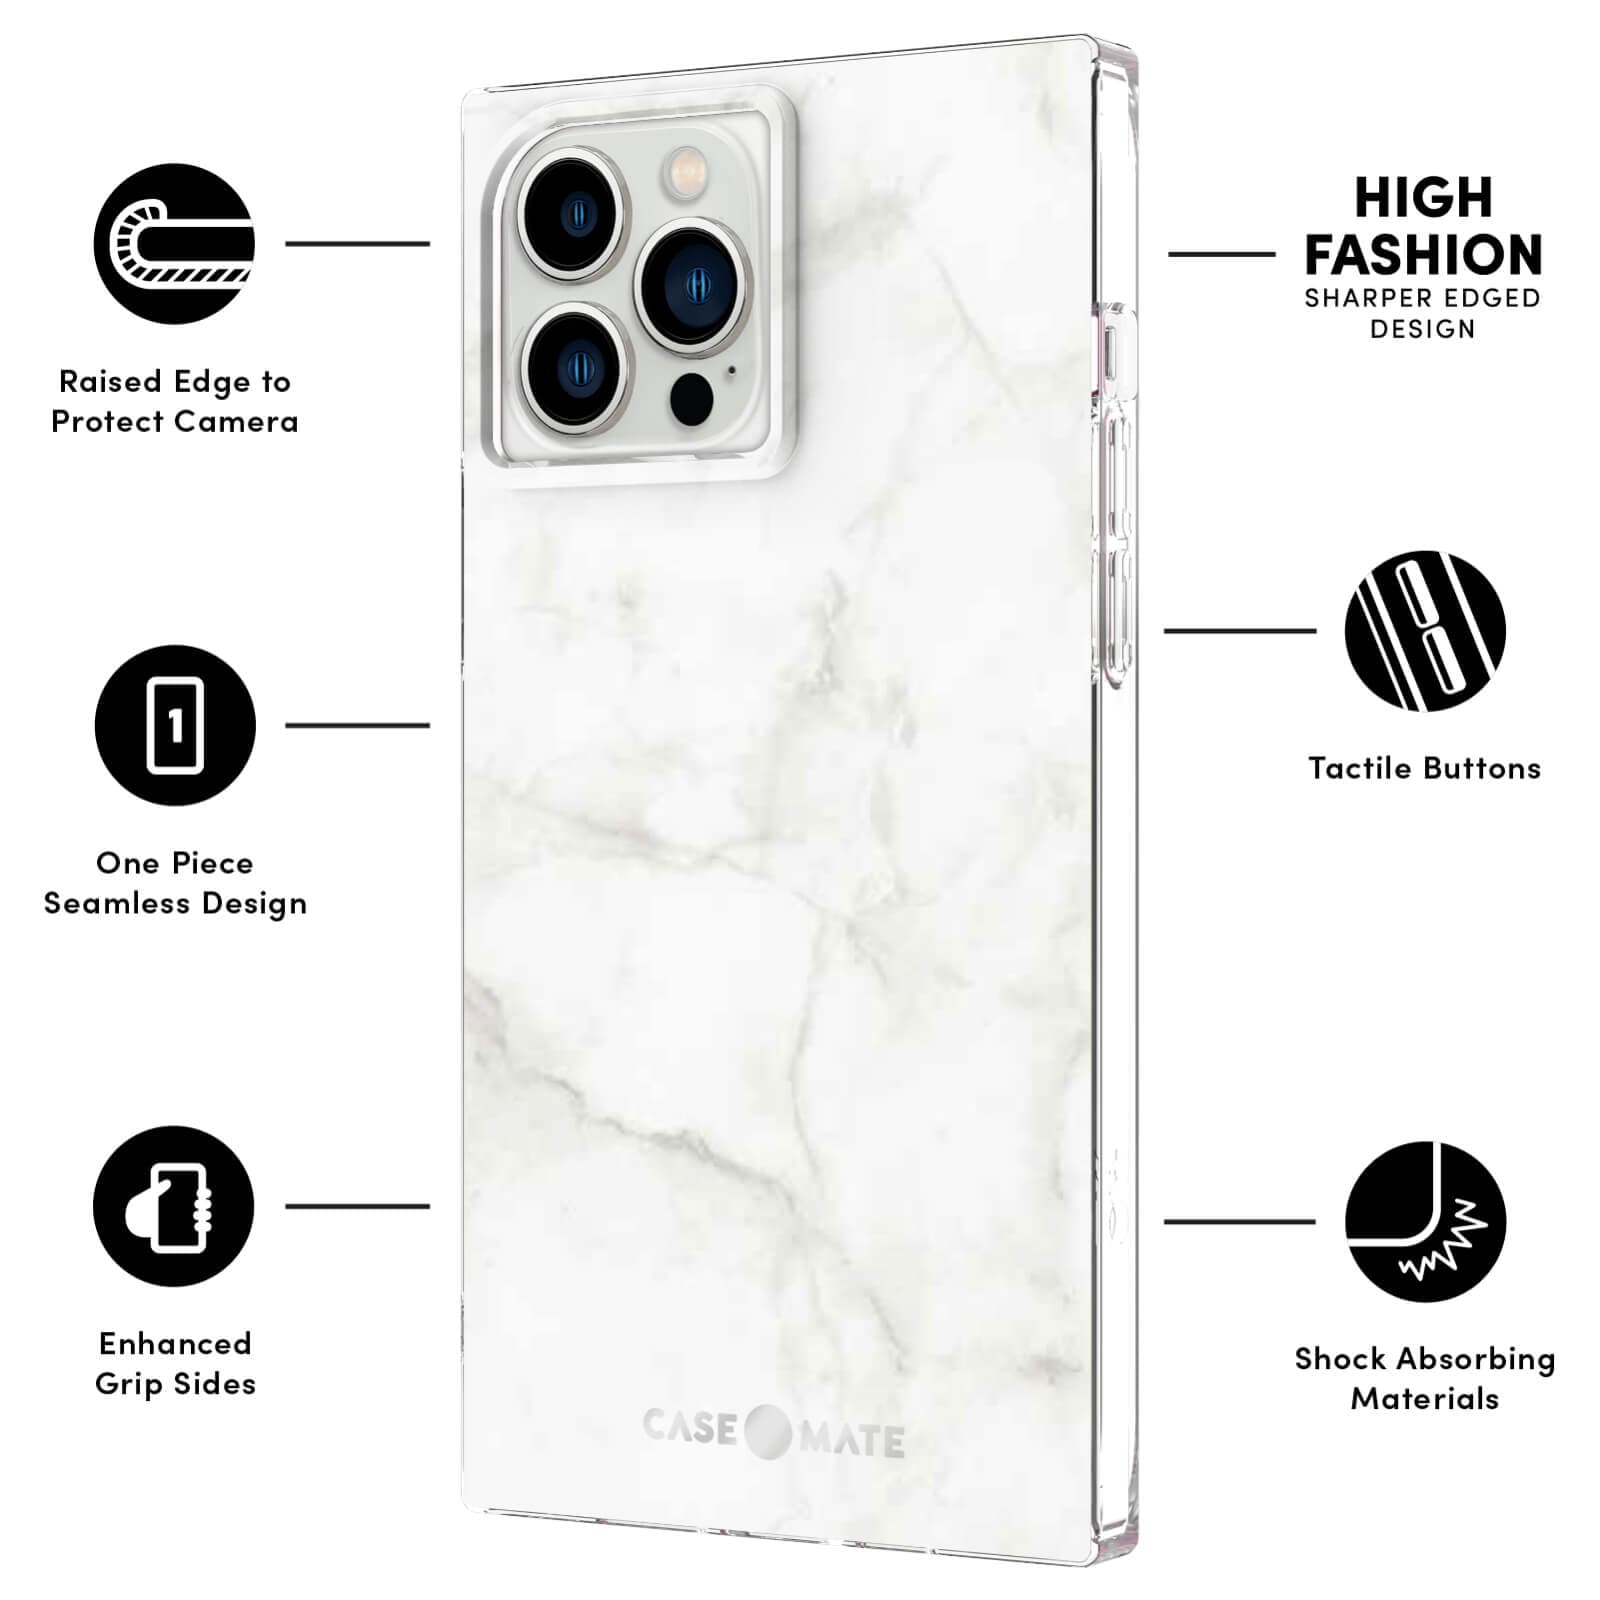 FEATURES: RAISED EDGE TO PROTECT CAMERA, ONE PIECE SEAMLESS DESIGN, ENHANCED GRIP SIDES, HIGH FASHION SHARPR EDGED DESIGN, TACTILE BUTTONS, SHOCK ABSORBING MATERIALS. COLOR::WHITE MARBLE